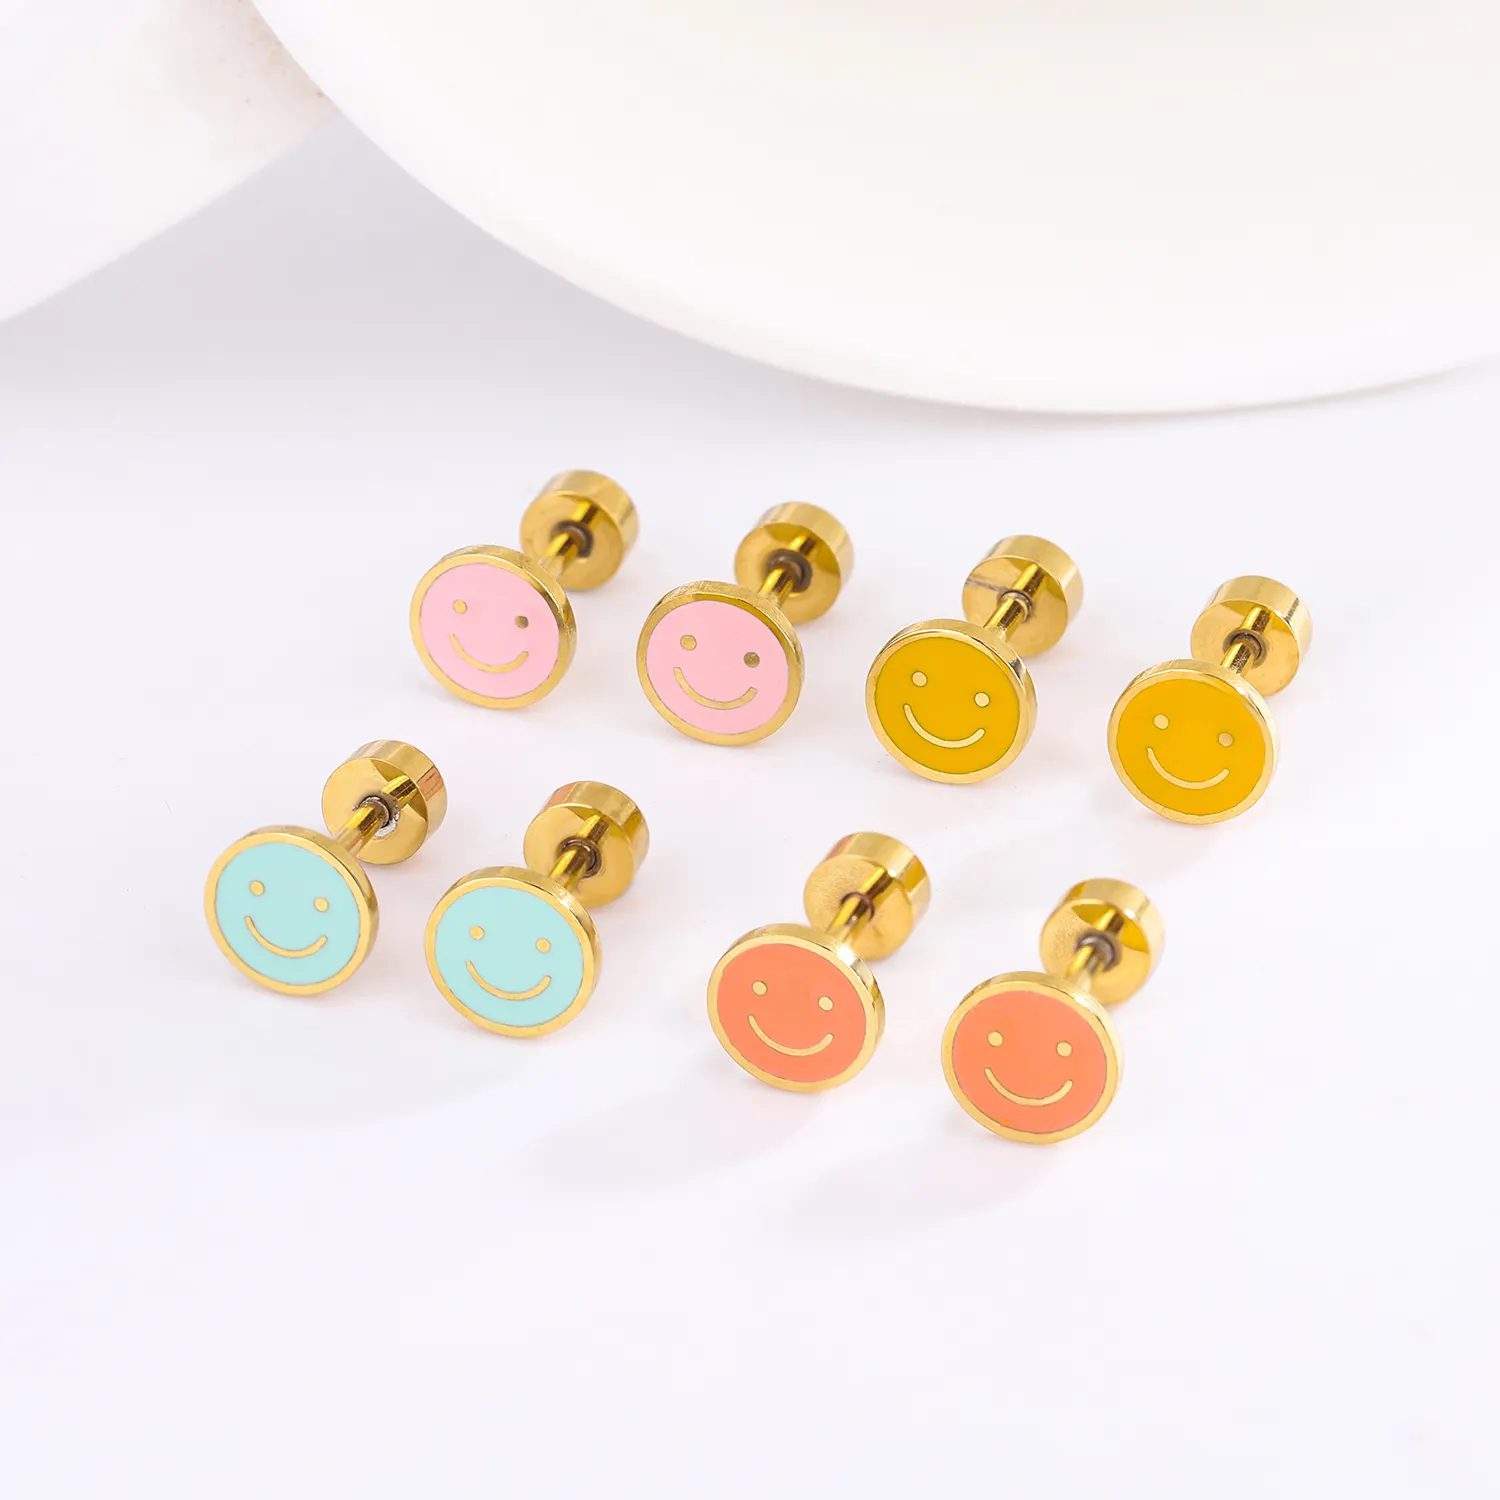 lovely stud earrings gold with colorful enamel smiley face stainless steel jewelry for children women girls